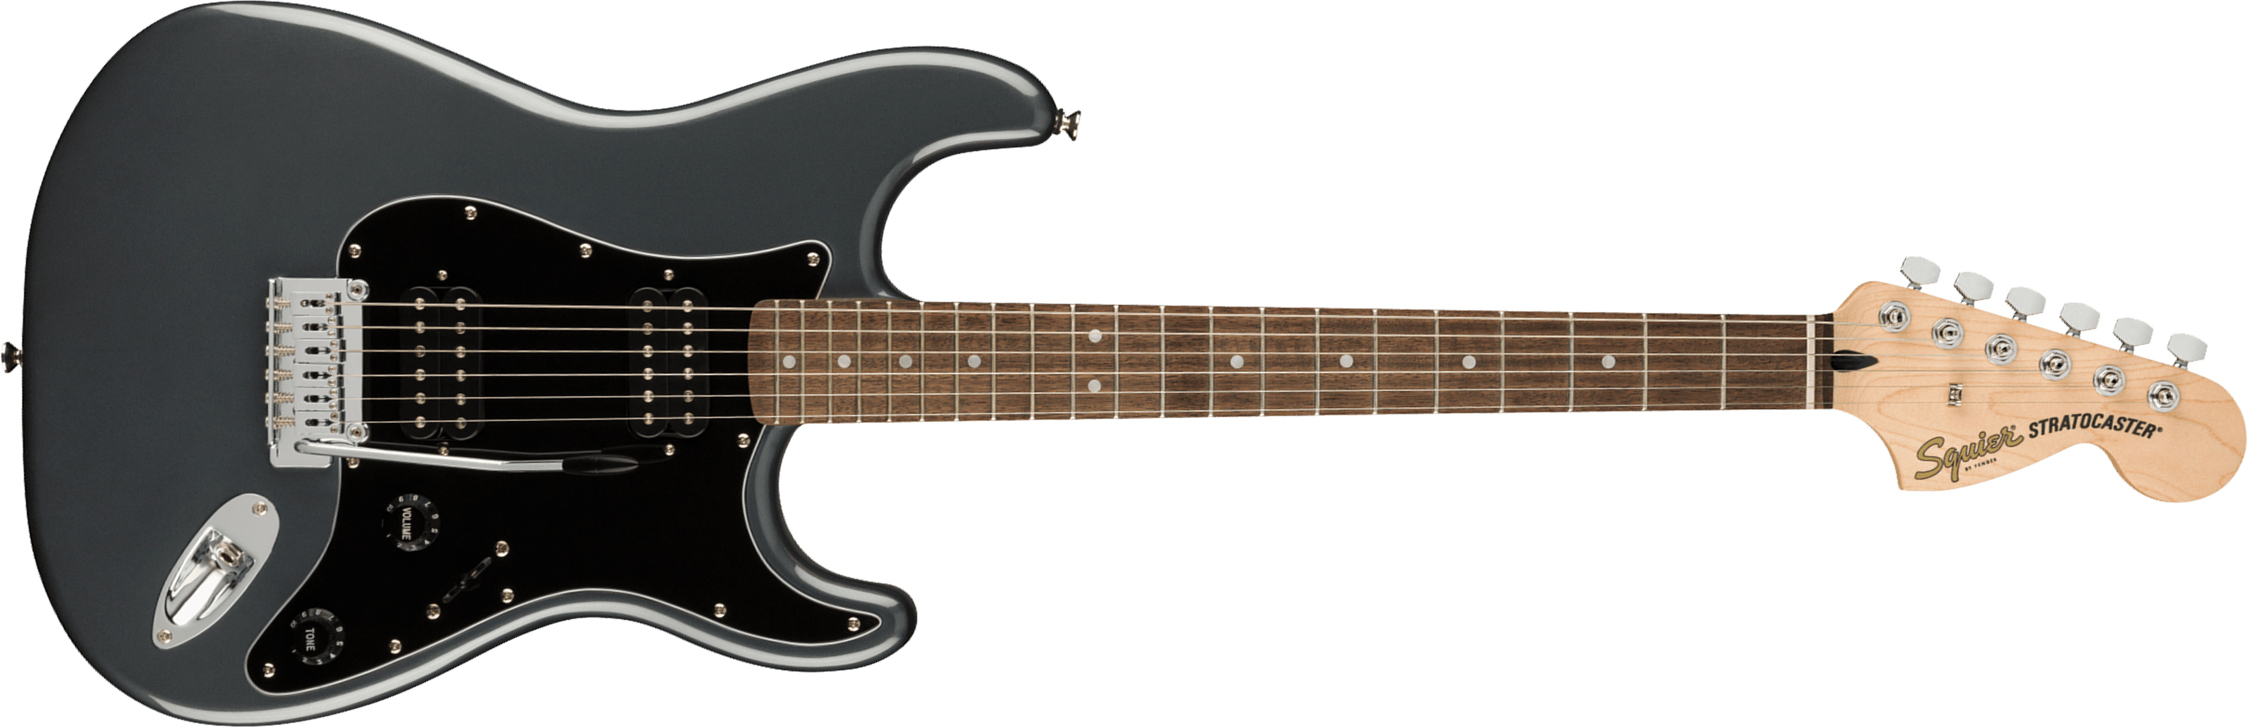 Squier Strat Affinity 2021 Hh Trem Lau - Charcoal Frost Metallic - E-Gitarre in Str-Form - Main picture